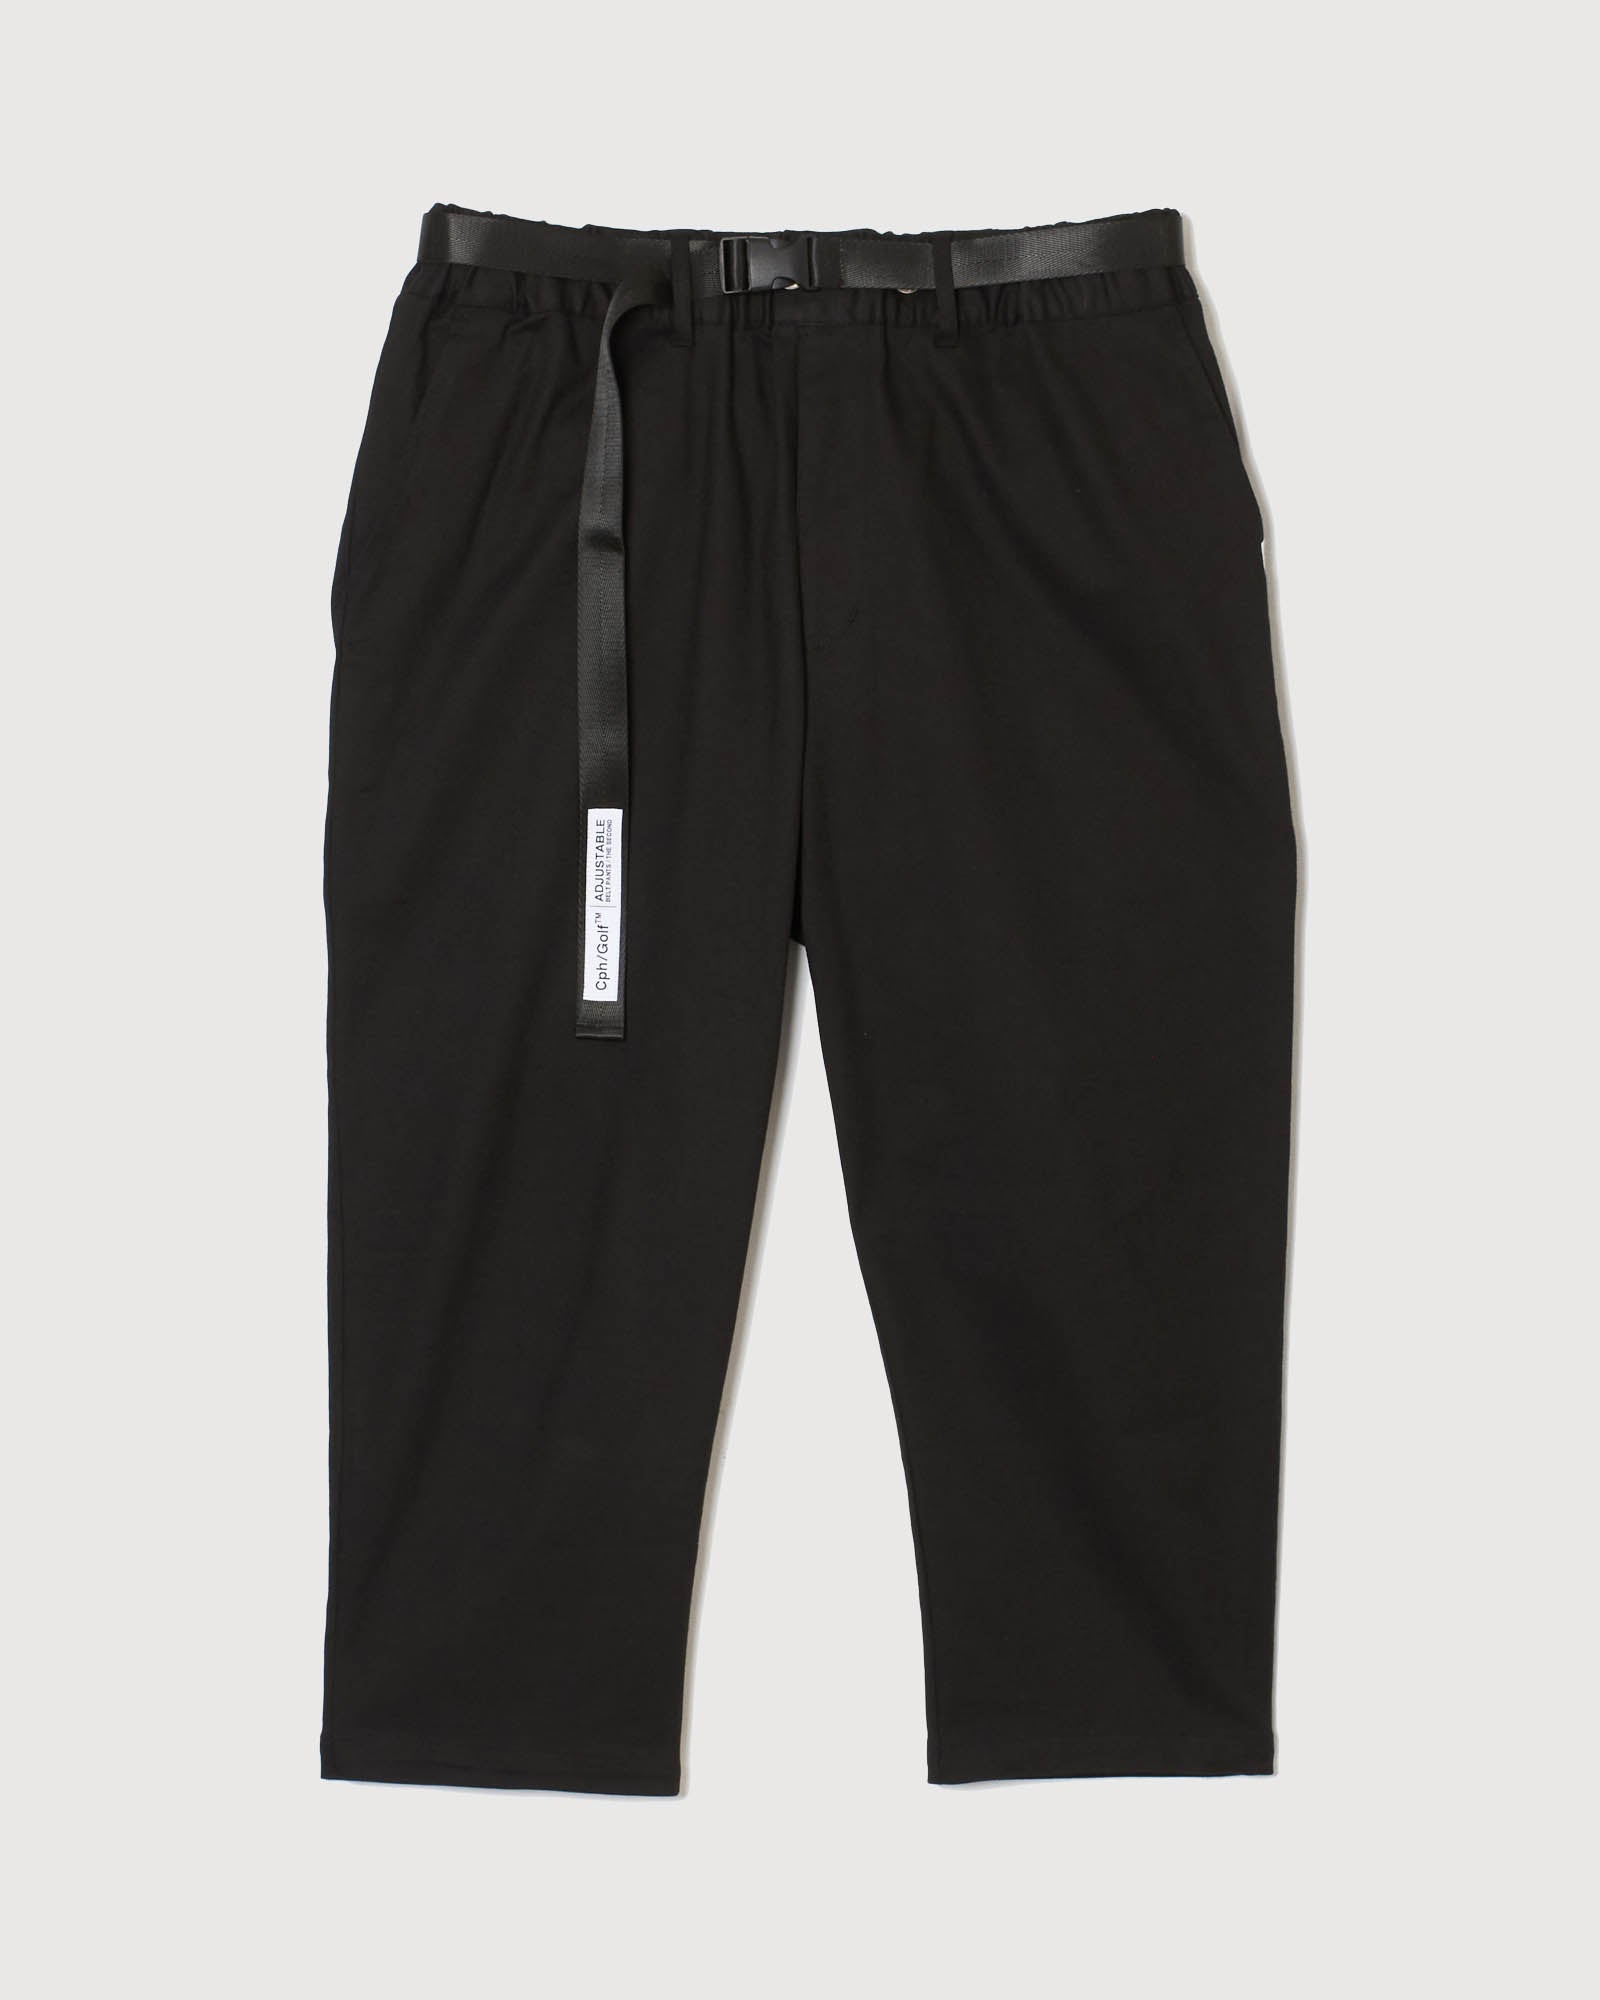 ADJUSTABLE CROPPED CHINO PANTS - BLACK - – Captains Helm Golf